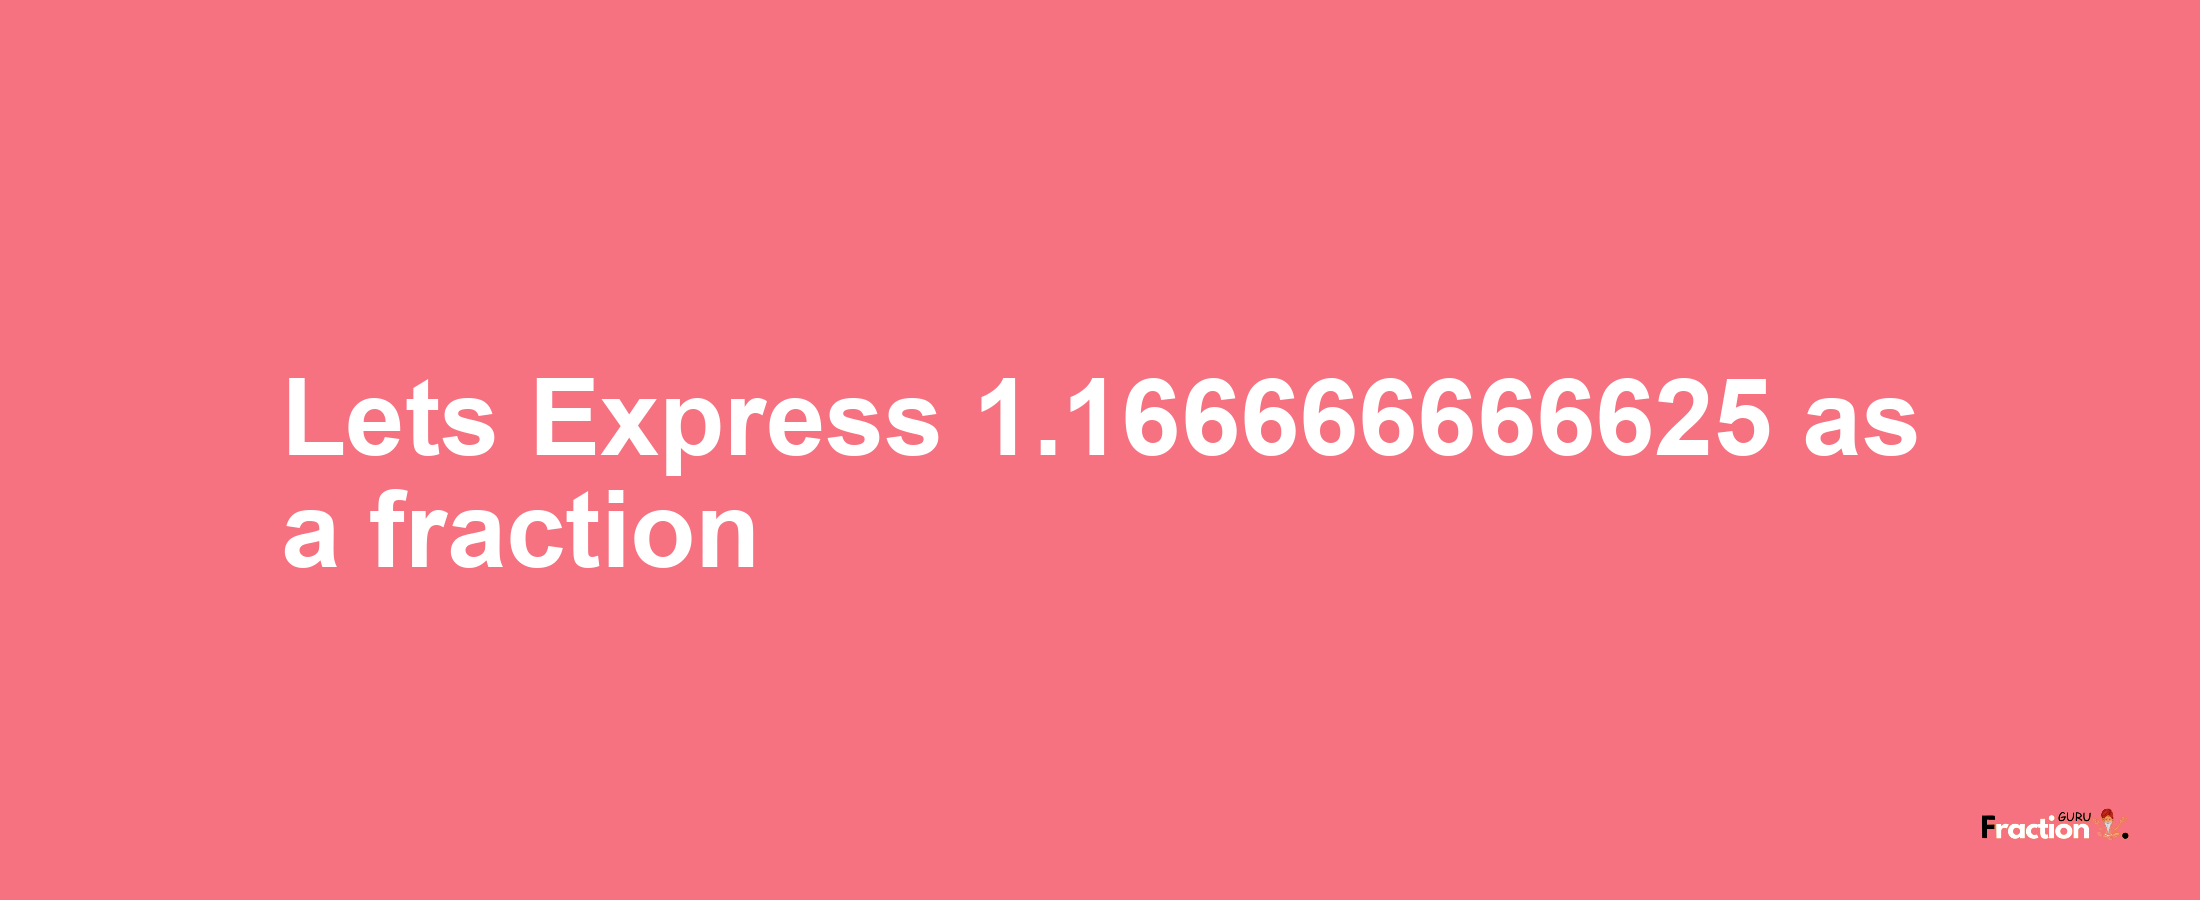 Lets Express 1.166666666625 as afraction